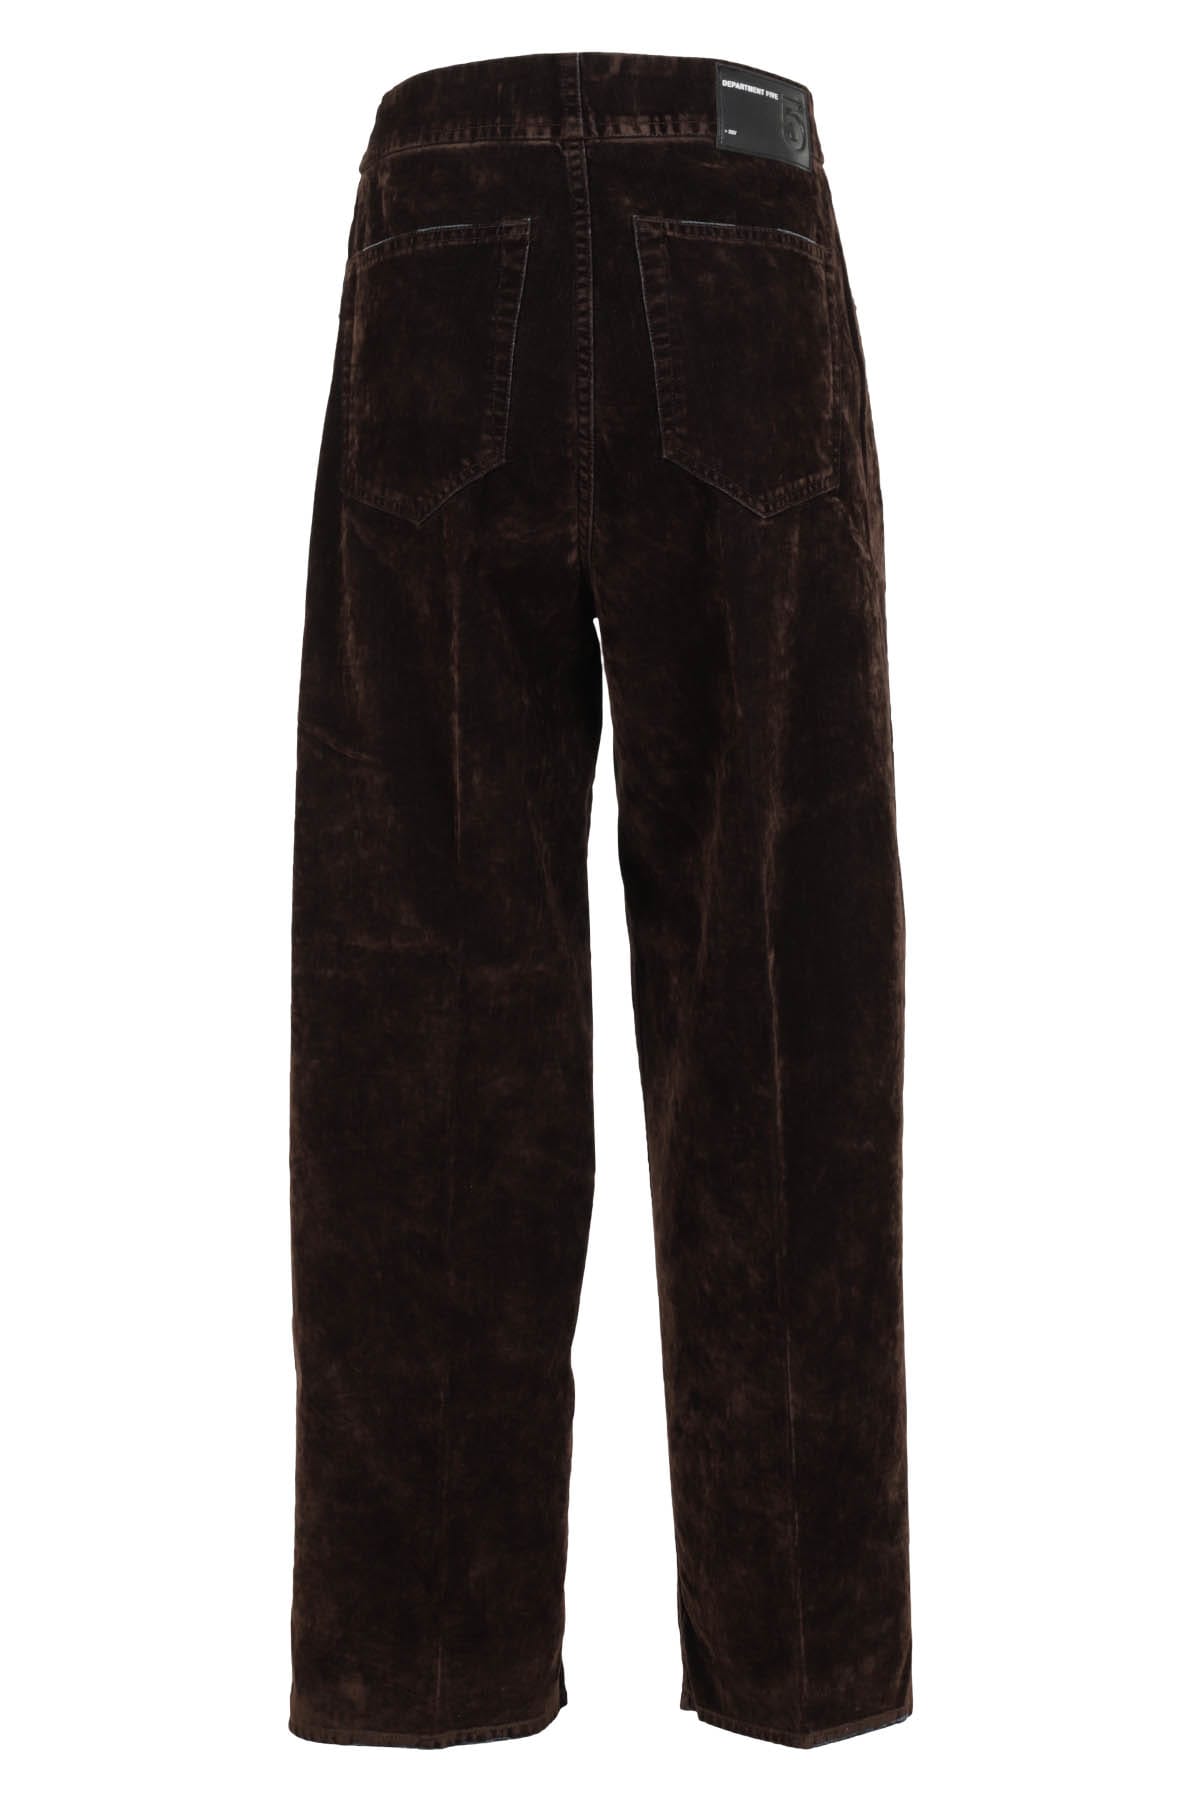 Shop Department 5 Trousers Department Five In Brown